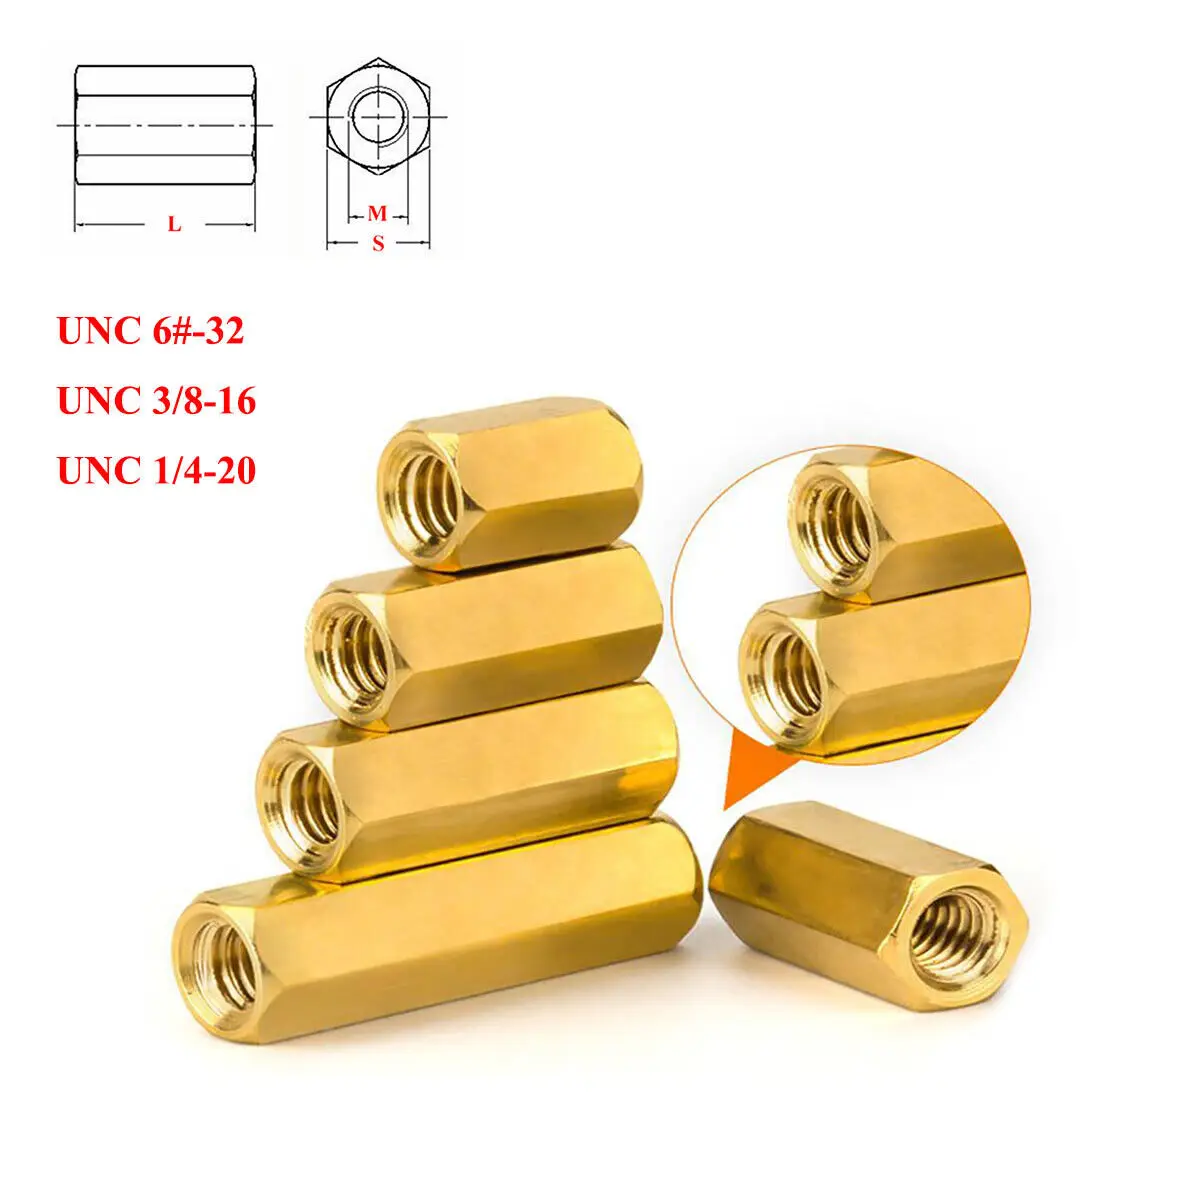 

UNC 6#-32 & 1/4-20 & 3/8-16 Brass Hex Standoff Pillars Hexagon Female Threaded Studs PCB Motherboard Spacer Nuts Hollow Column